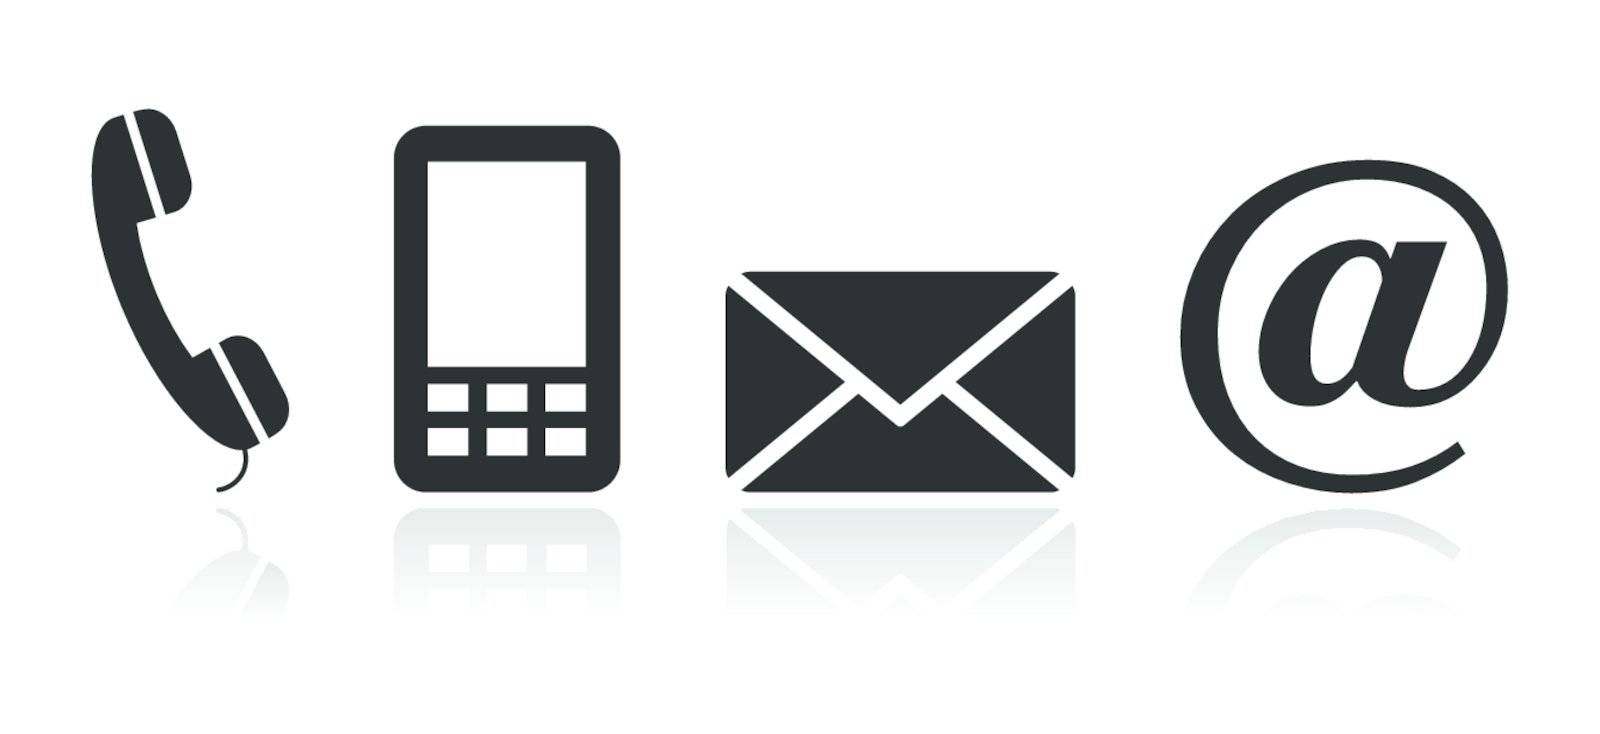 Glossy clean icons for Contact Us page